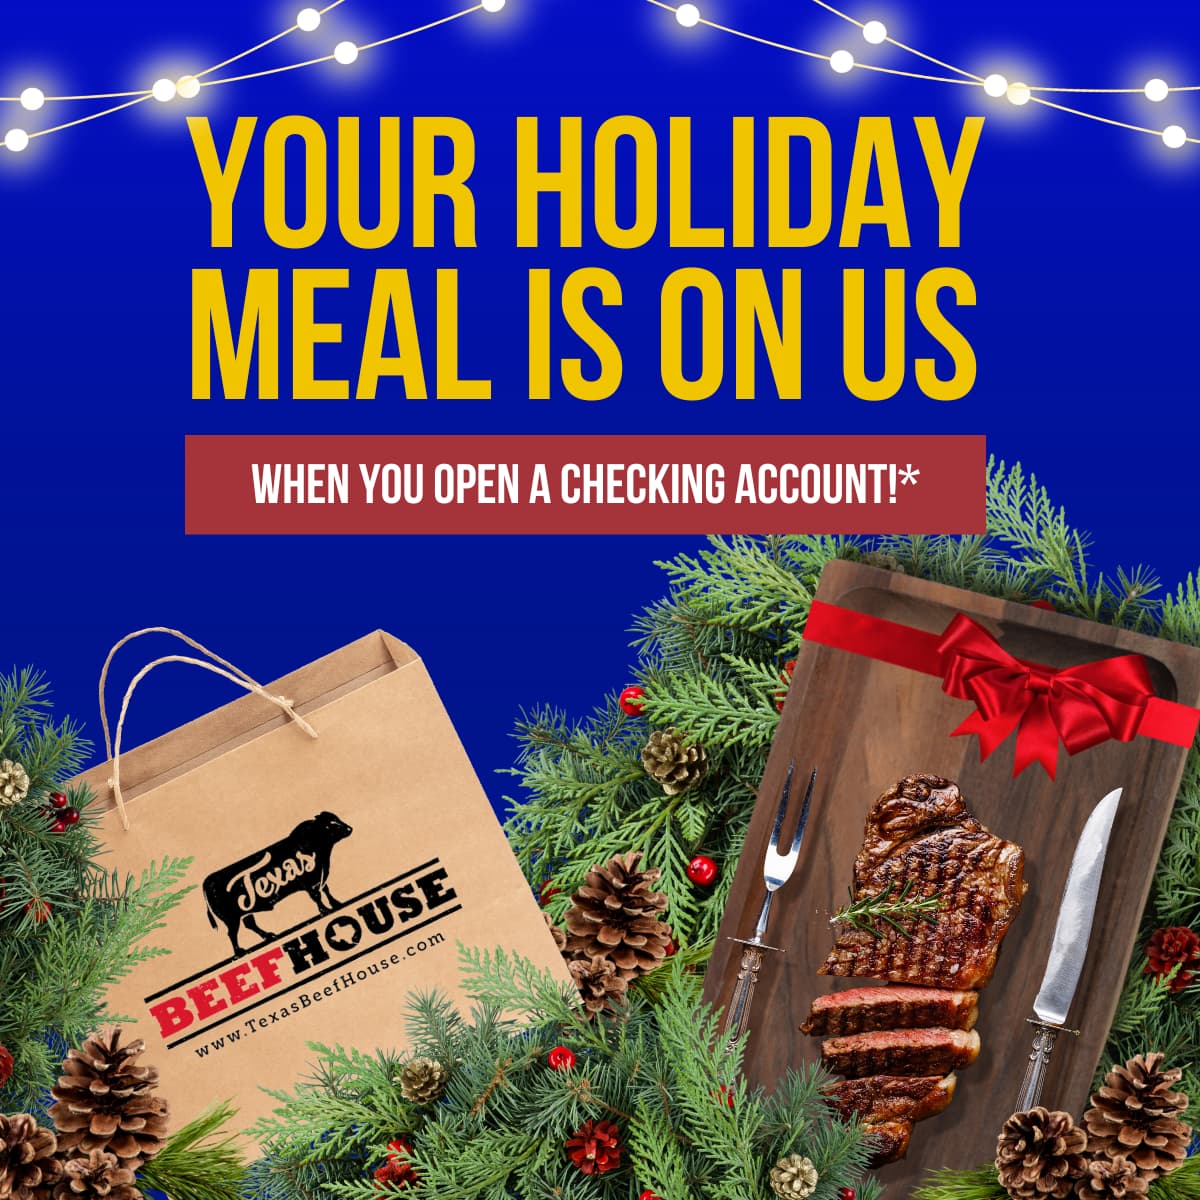 CTCU is giving away a $100 credit to Texas Beef House to help with your holiday meal!